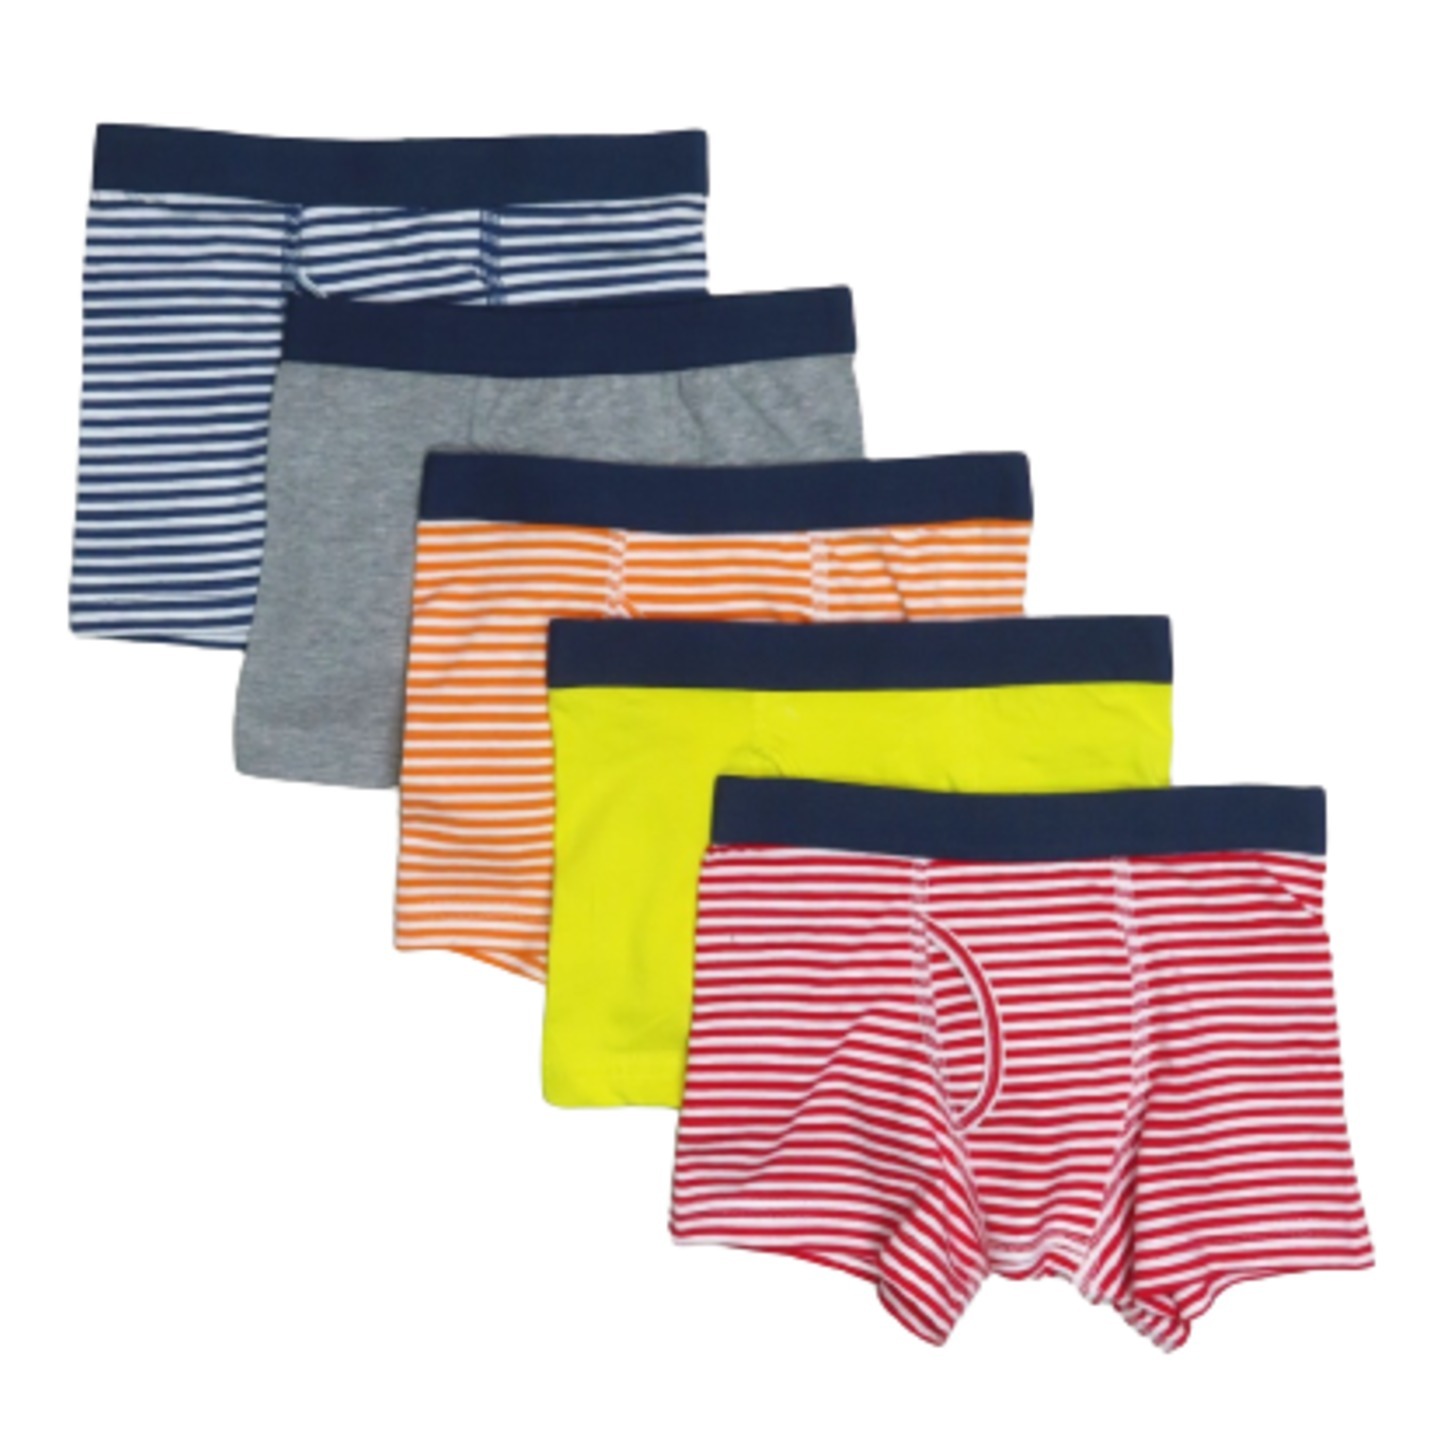 PRIMARY BOYS STRETCH 5 PACK BOXER SHORTS